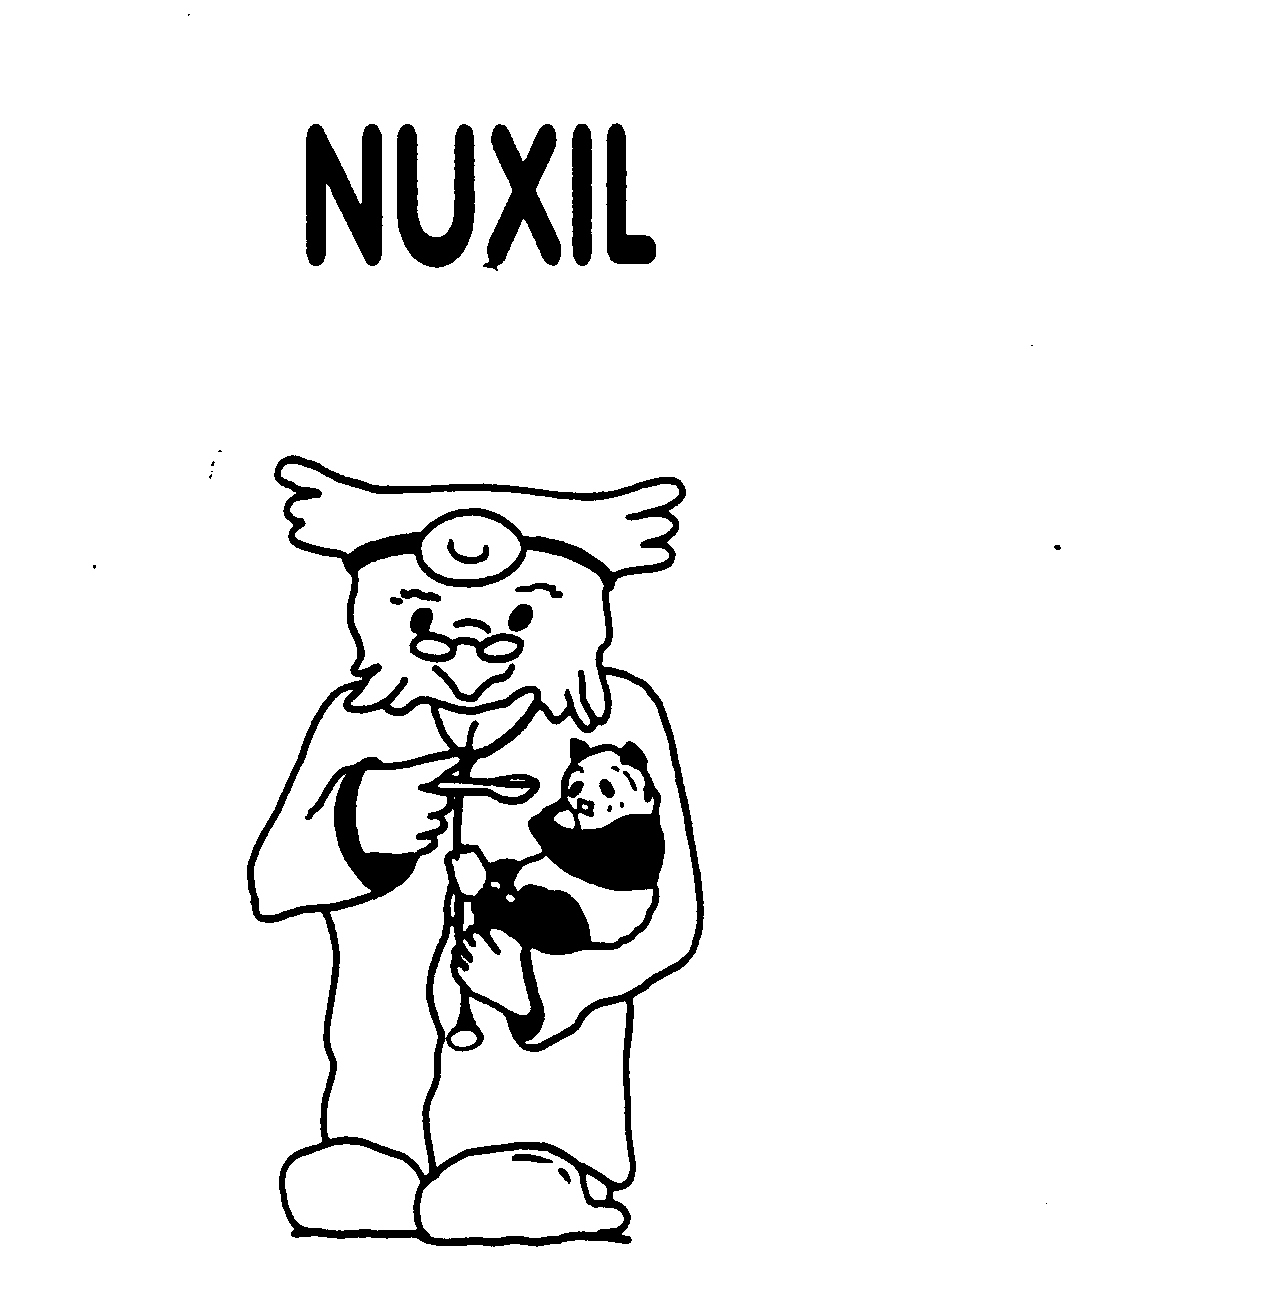  NUXIL